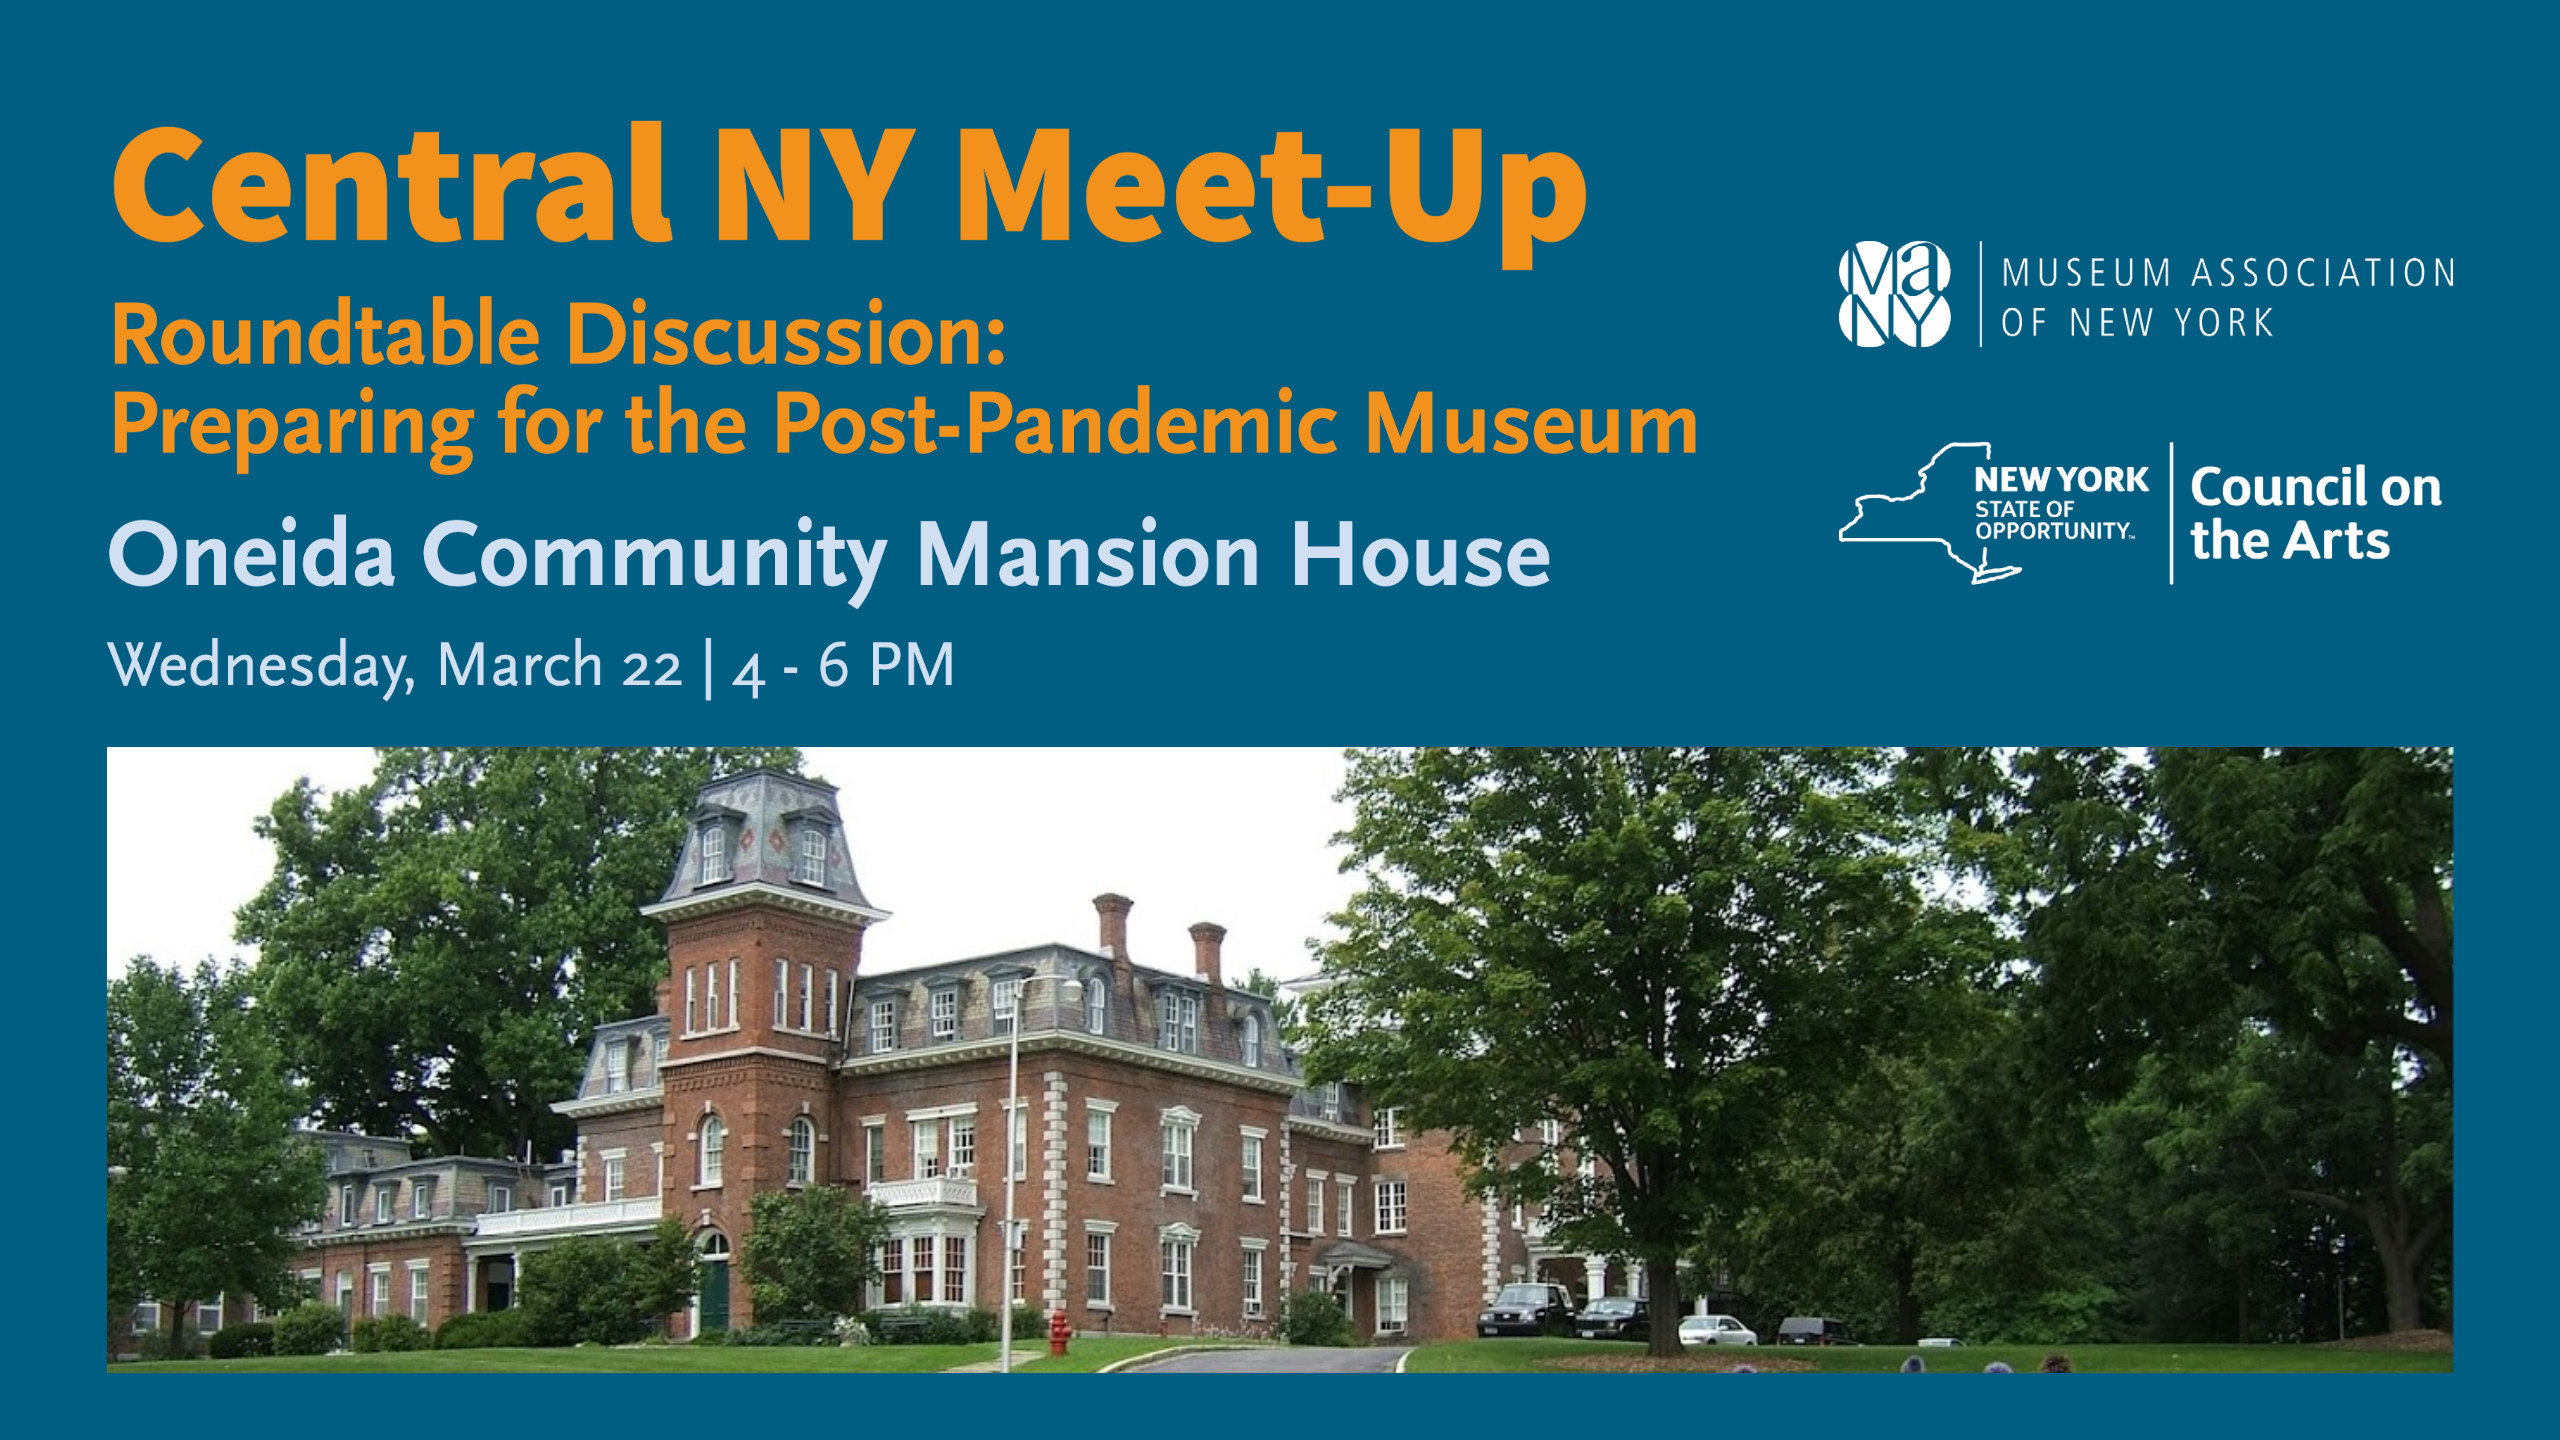 Central NY Meet-Up and Roundtable Discussion at the Oneida Community Mansion House on March 22 from 4 to 6 PM